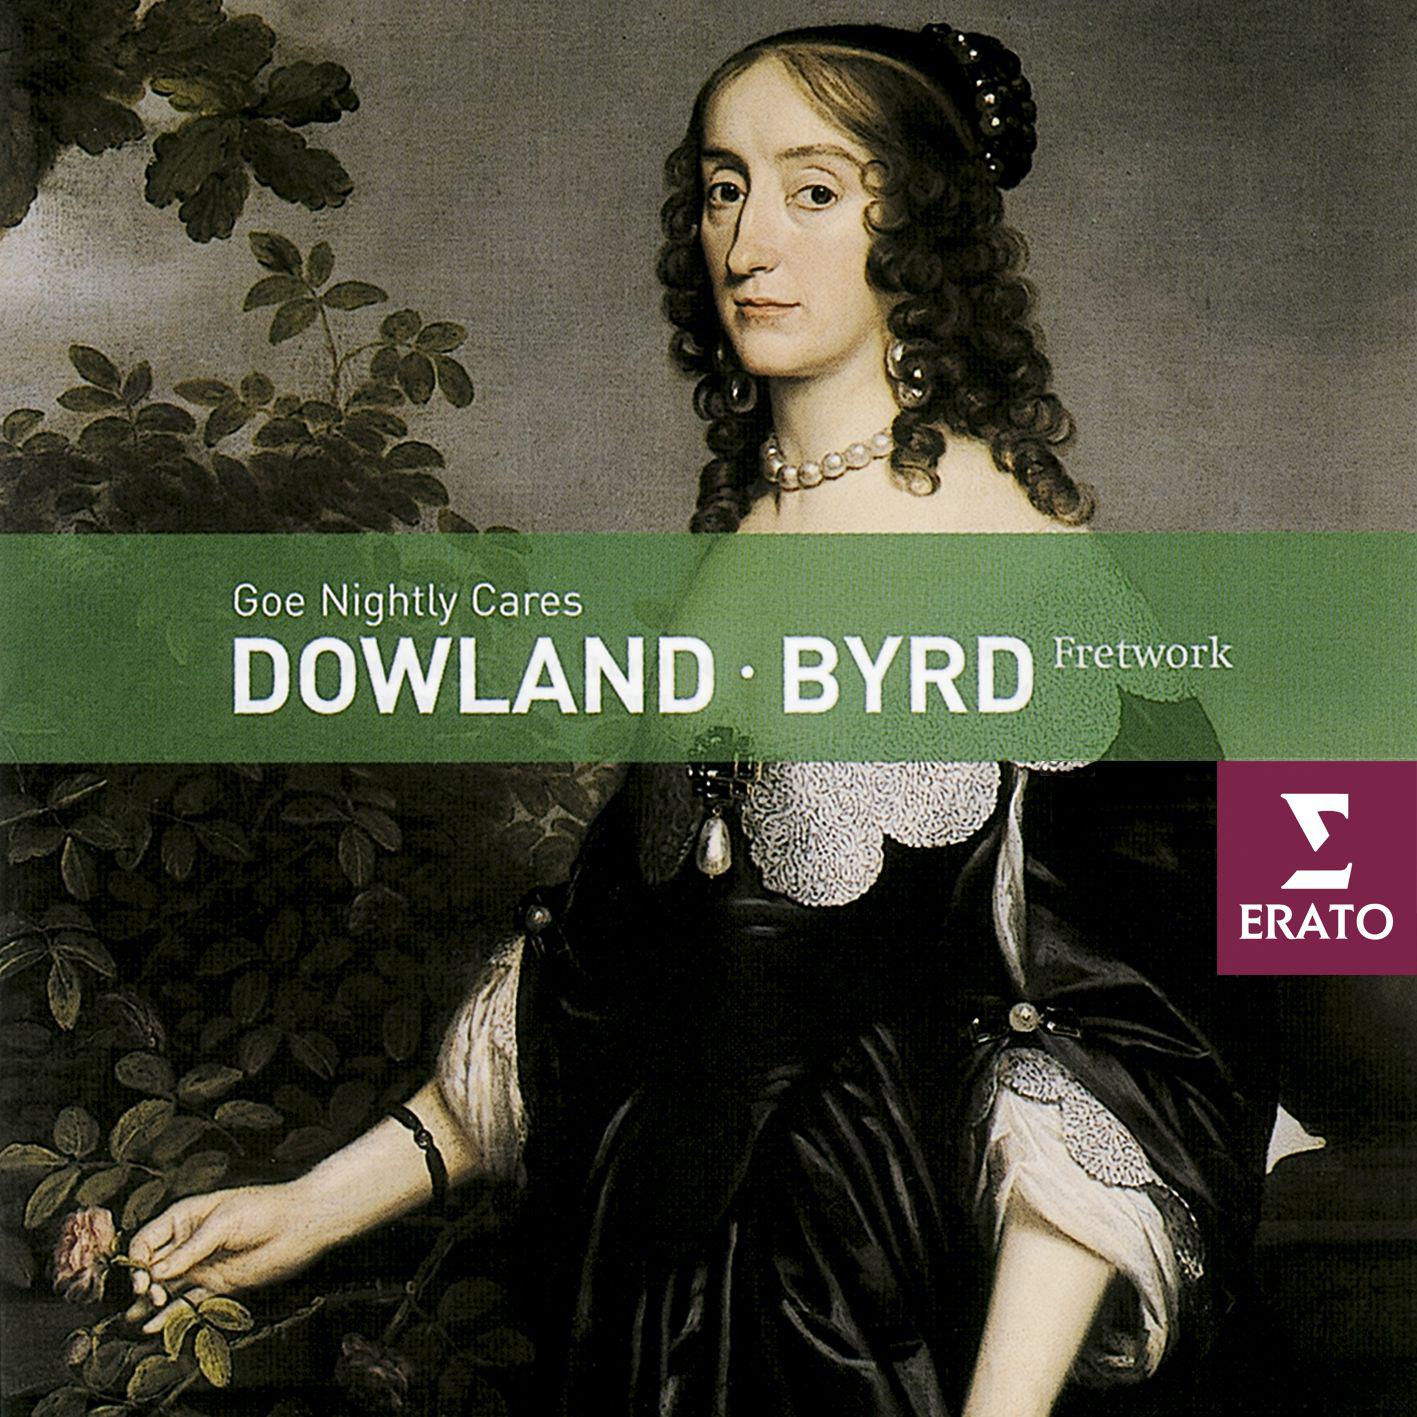 Dances from John Dowland's Lachrimae and Consort music and songs by William Byrd